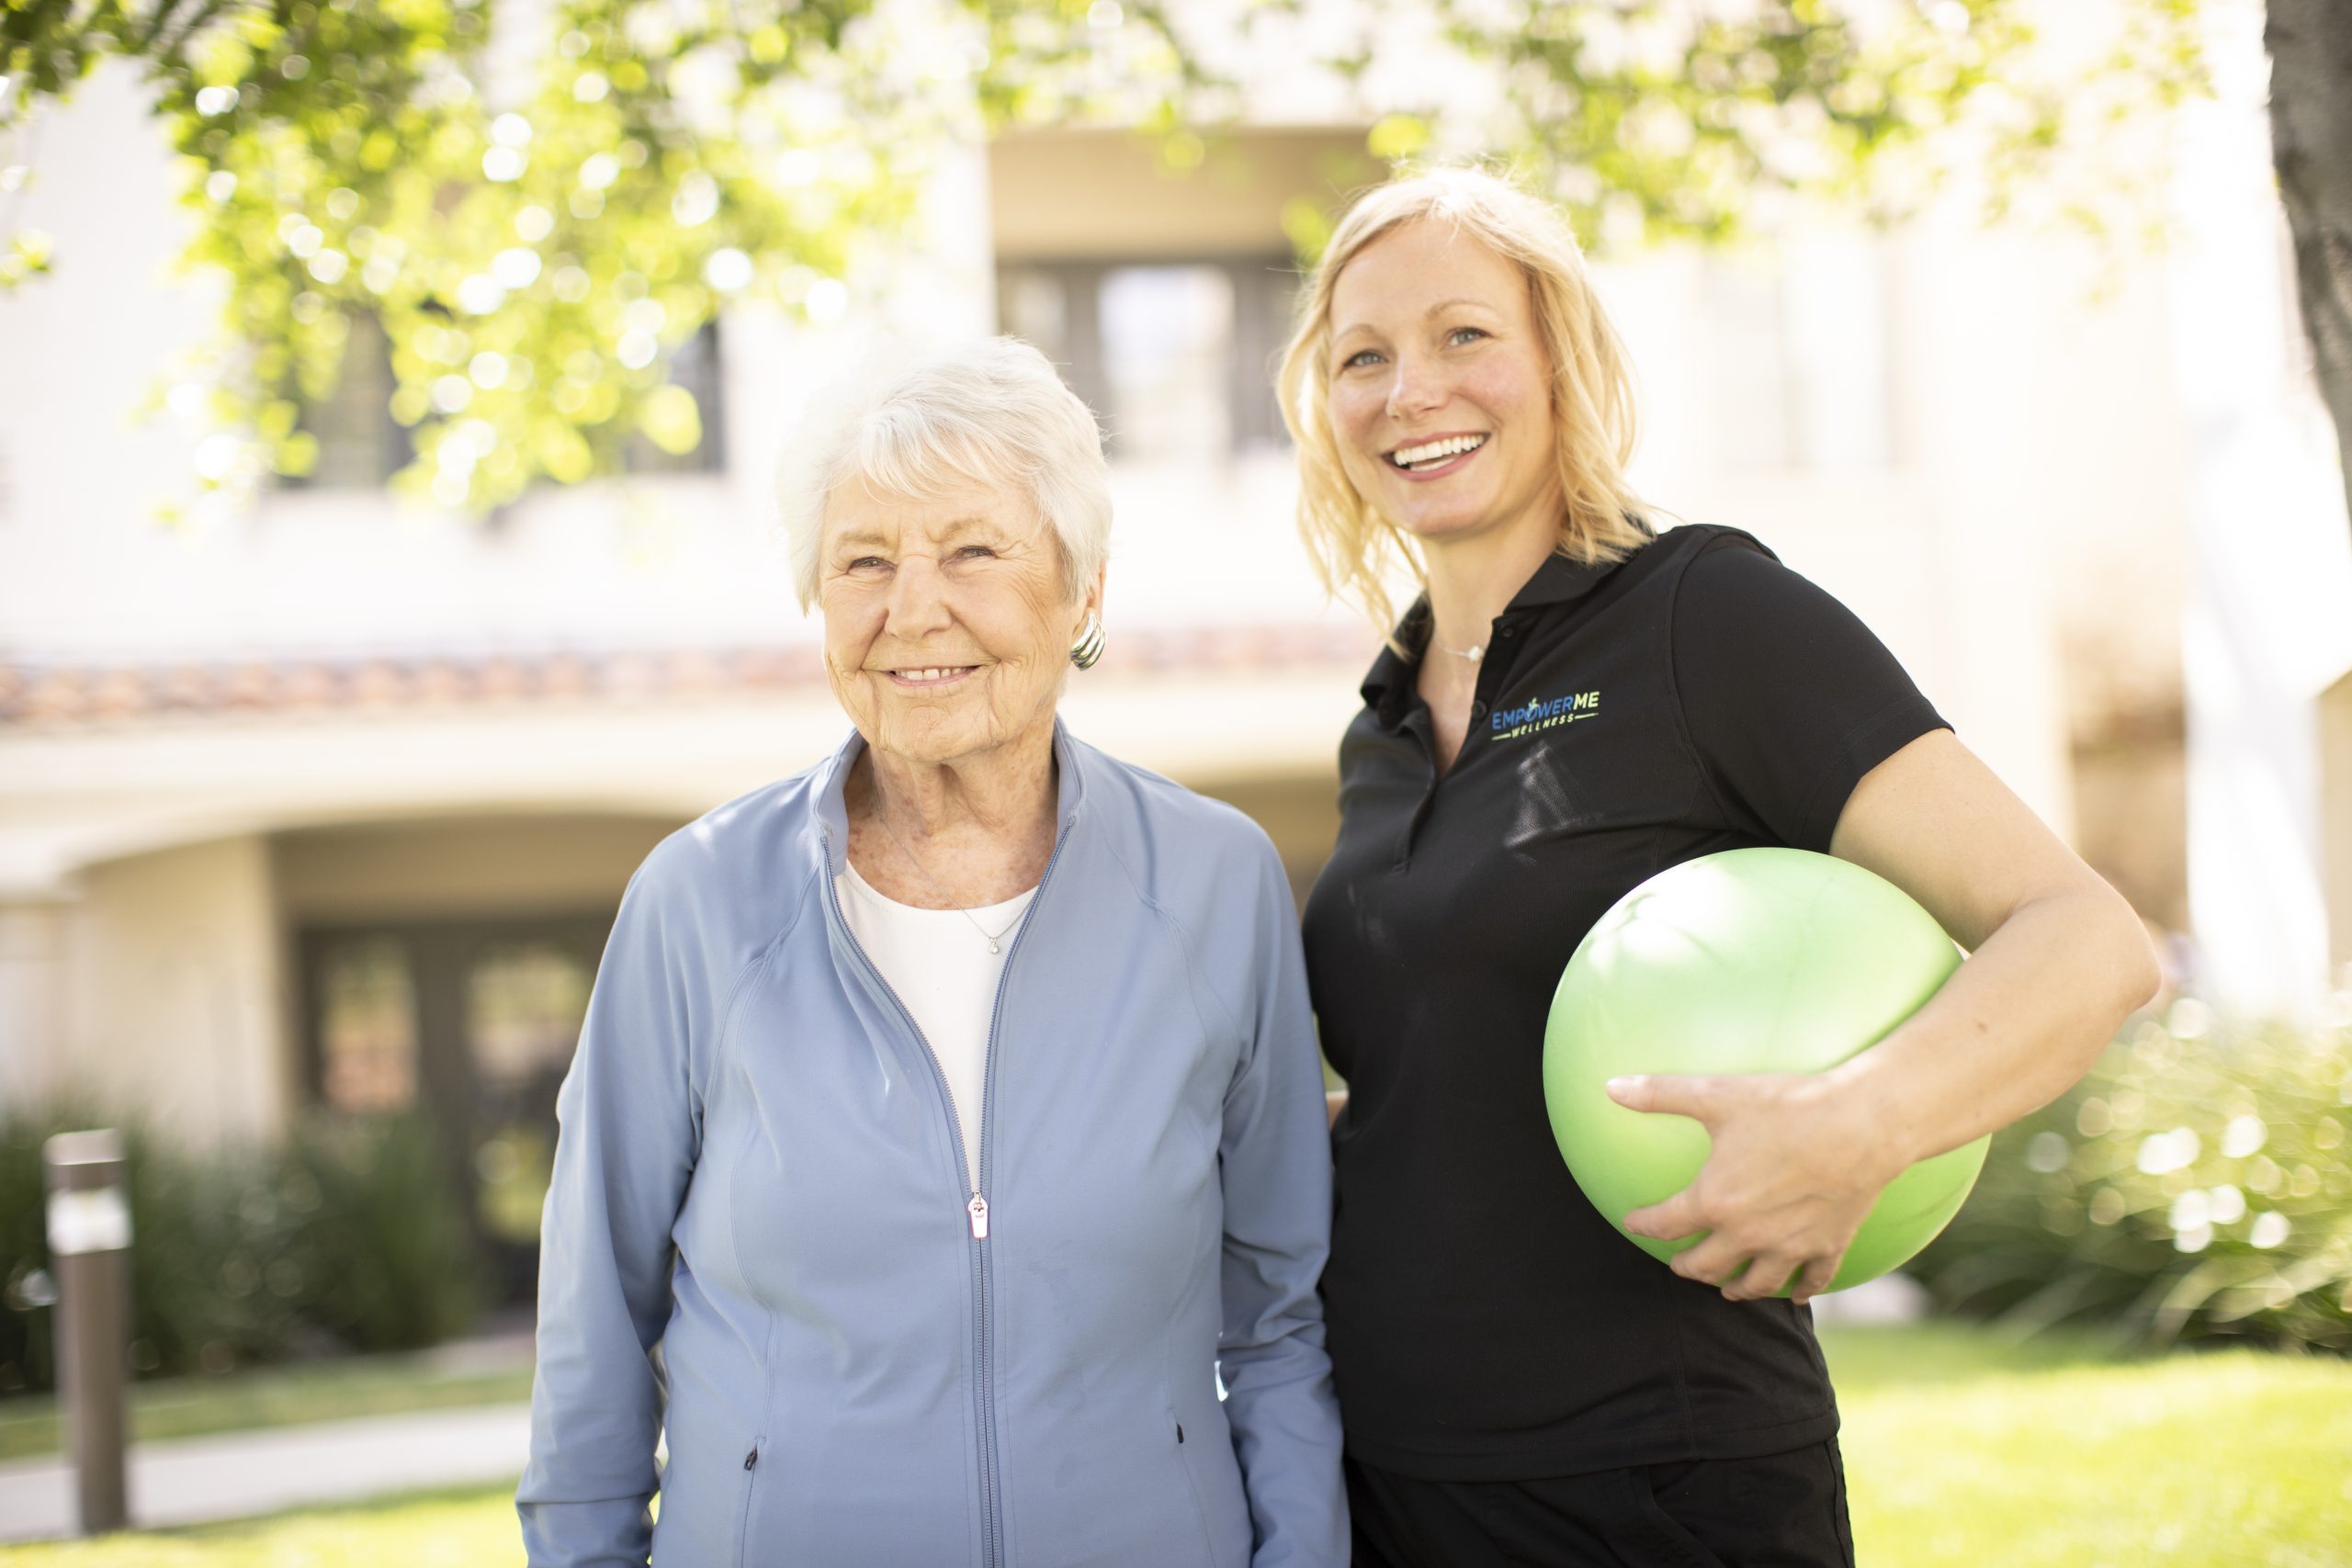 An exercise trainer and an older woman holding an exercise ball, showcasing a bond from a shared activity.